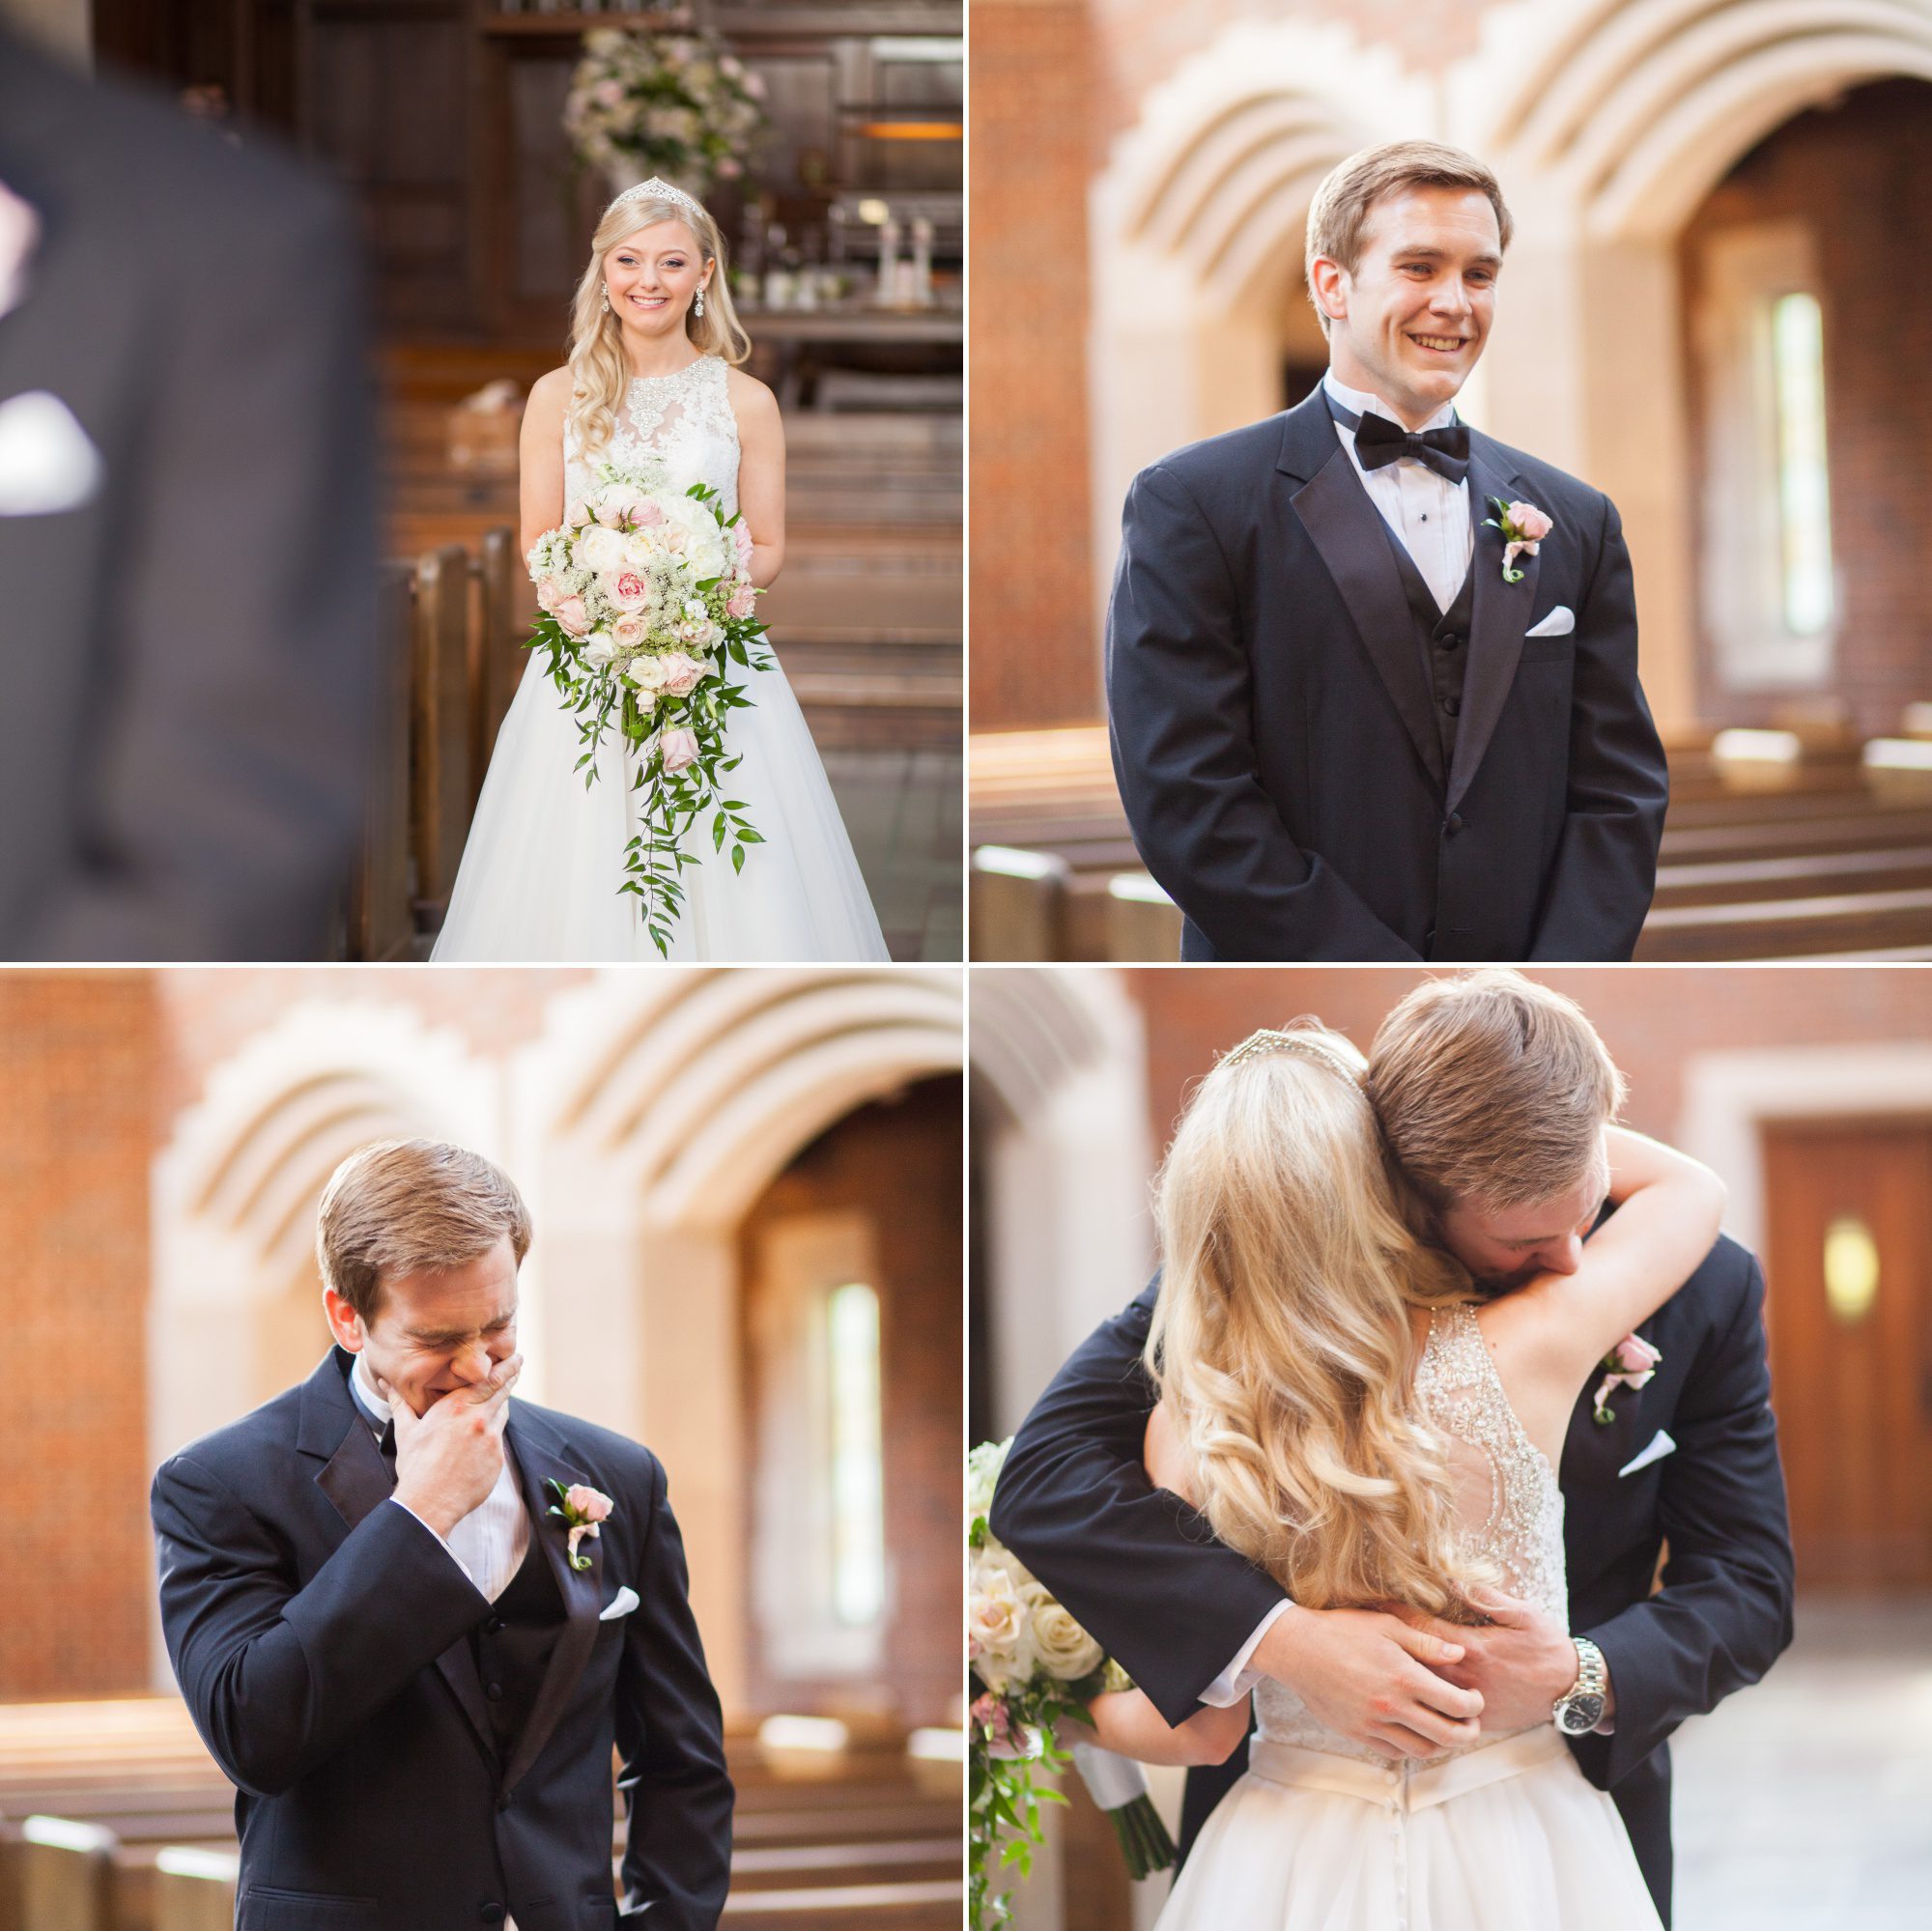 Emotions run high at first look and private moment - Wightman Chapel at Scarritt Bennett before summer wedding ceremony in Nashville, TN. Photography by Krista Lee Photography.